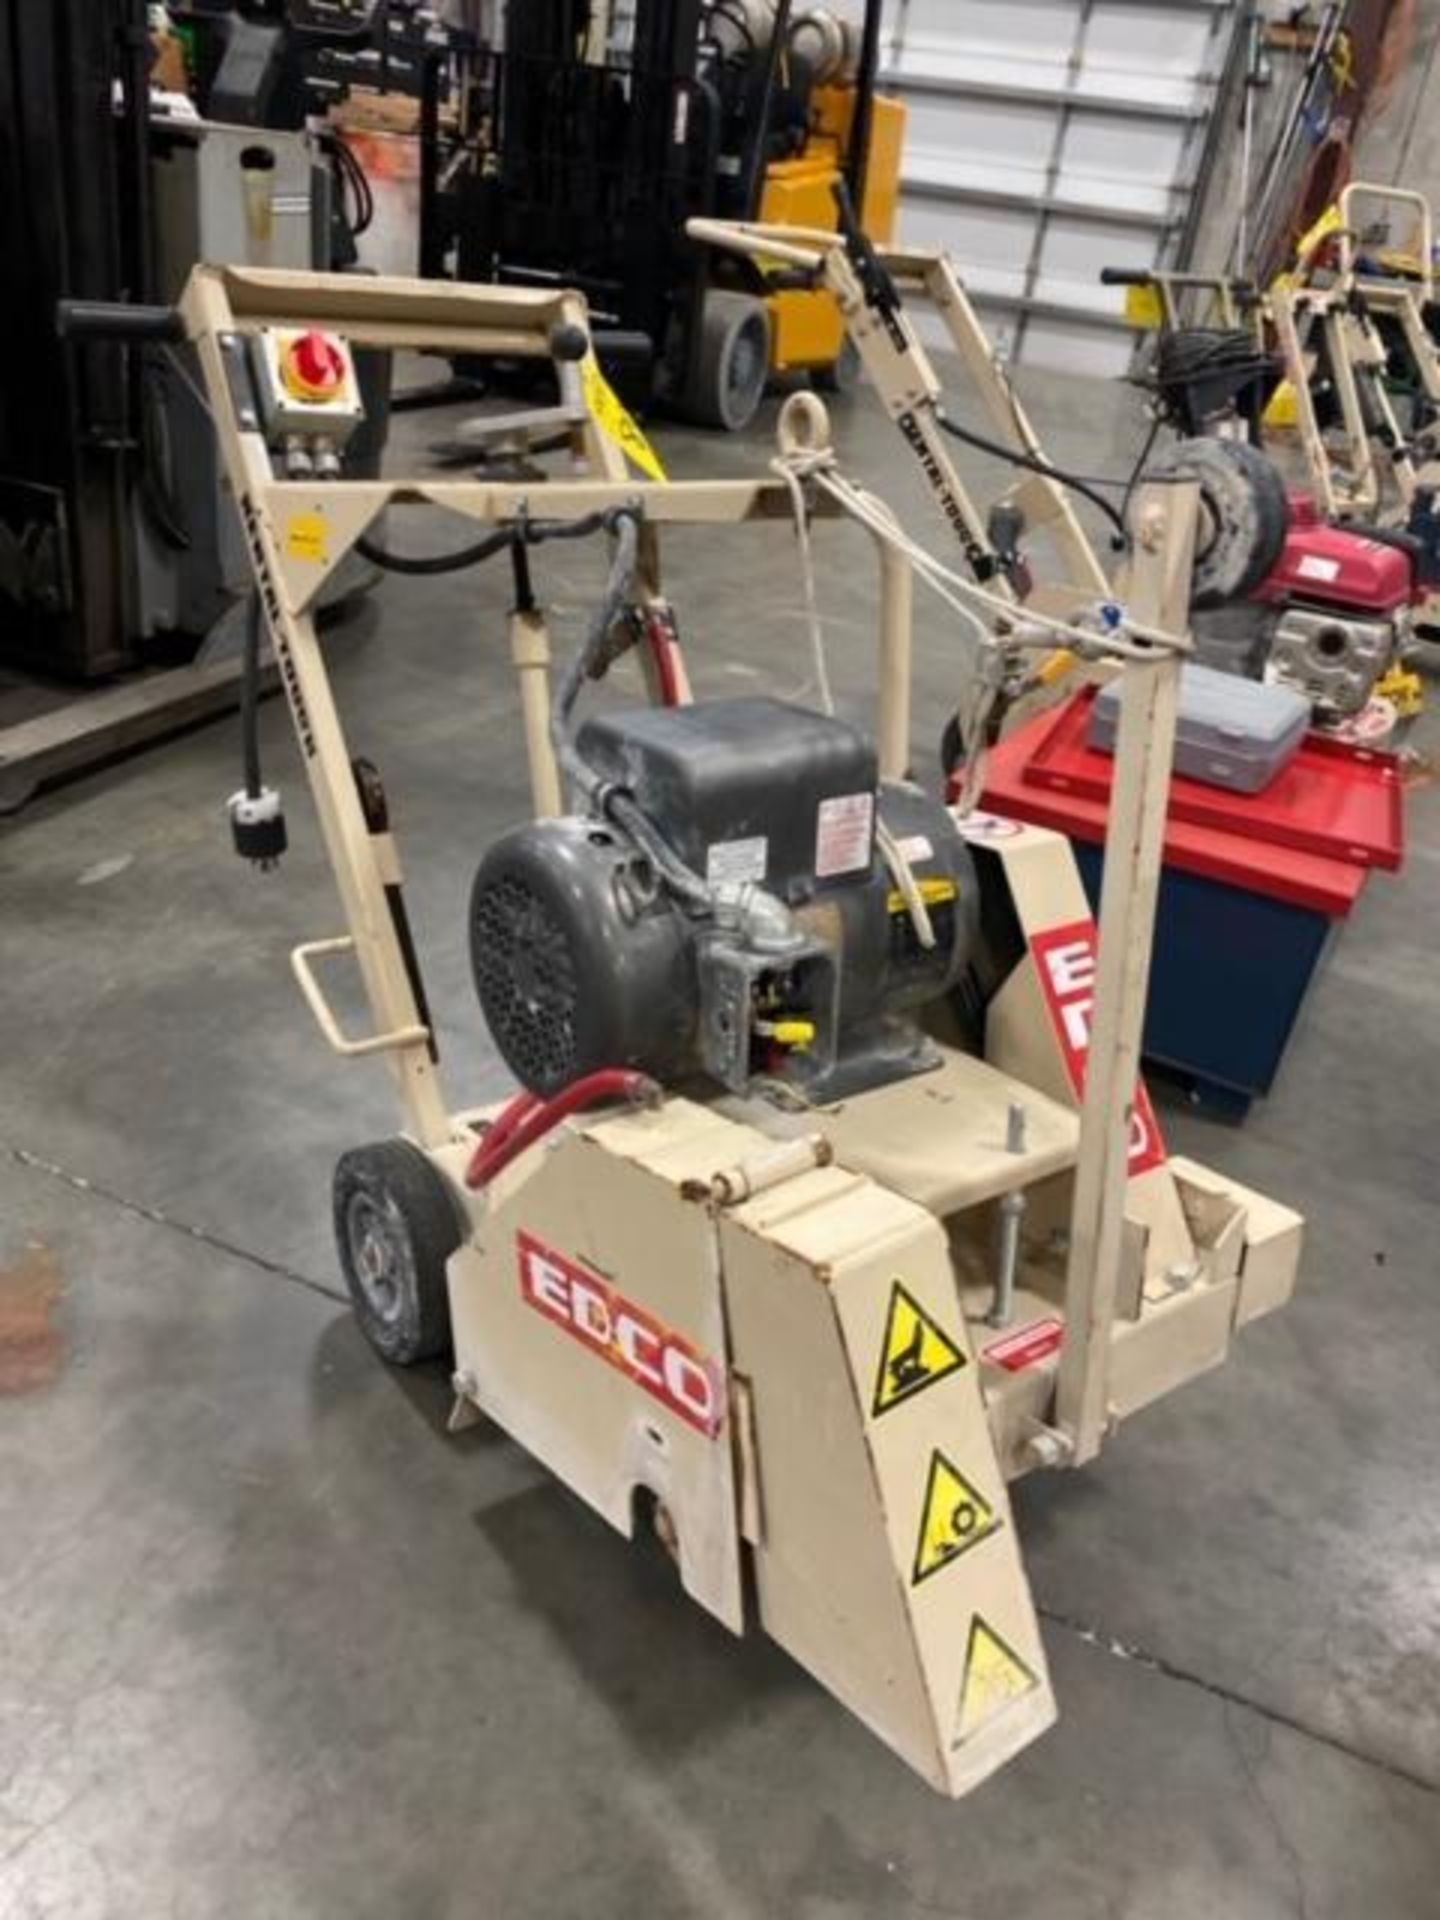 2017 EDCO DS-18-5 WALKBEHIND SAW SUPPORT EQUIPMENT - Image 3 of 20